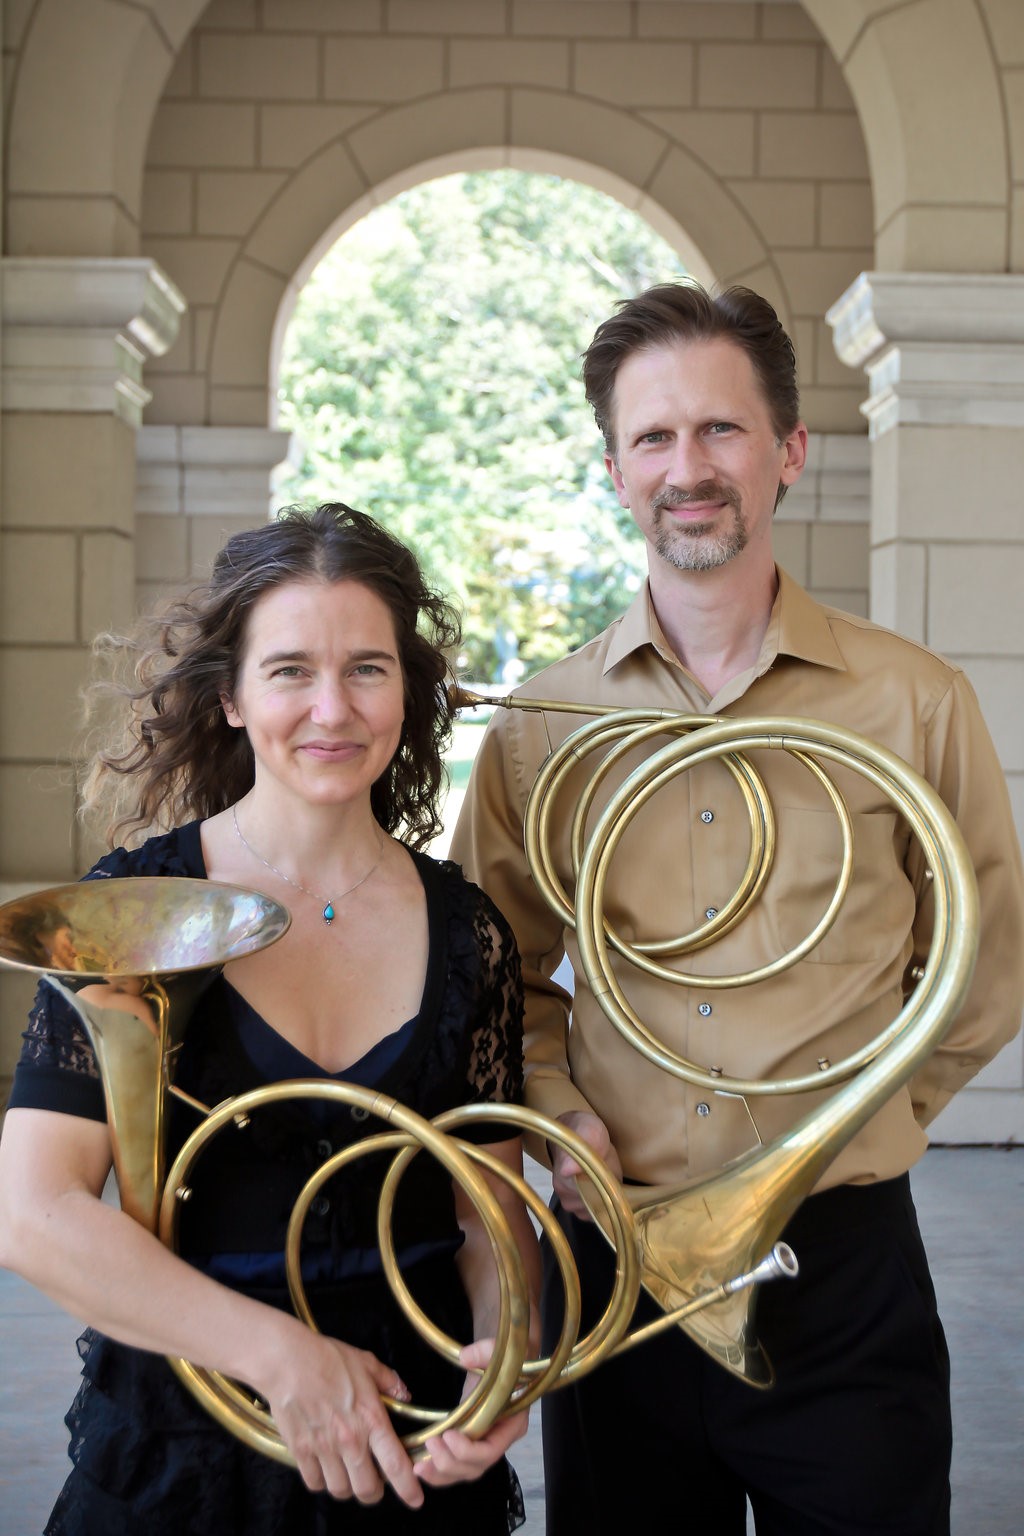 Horn players